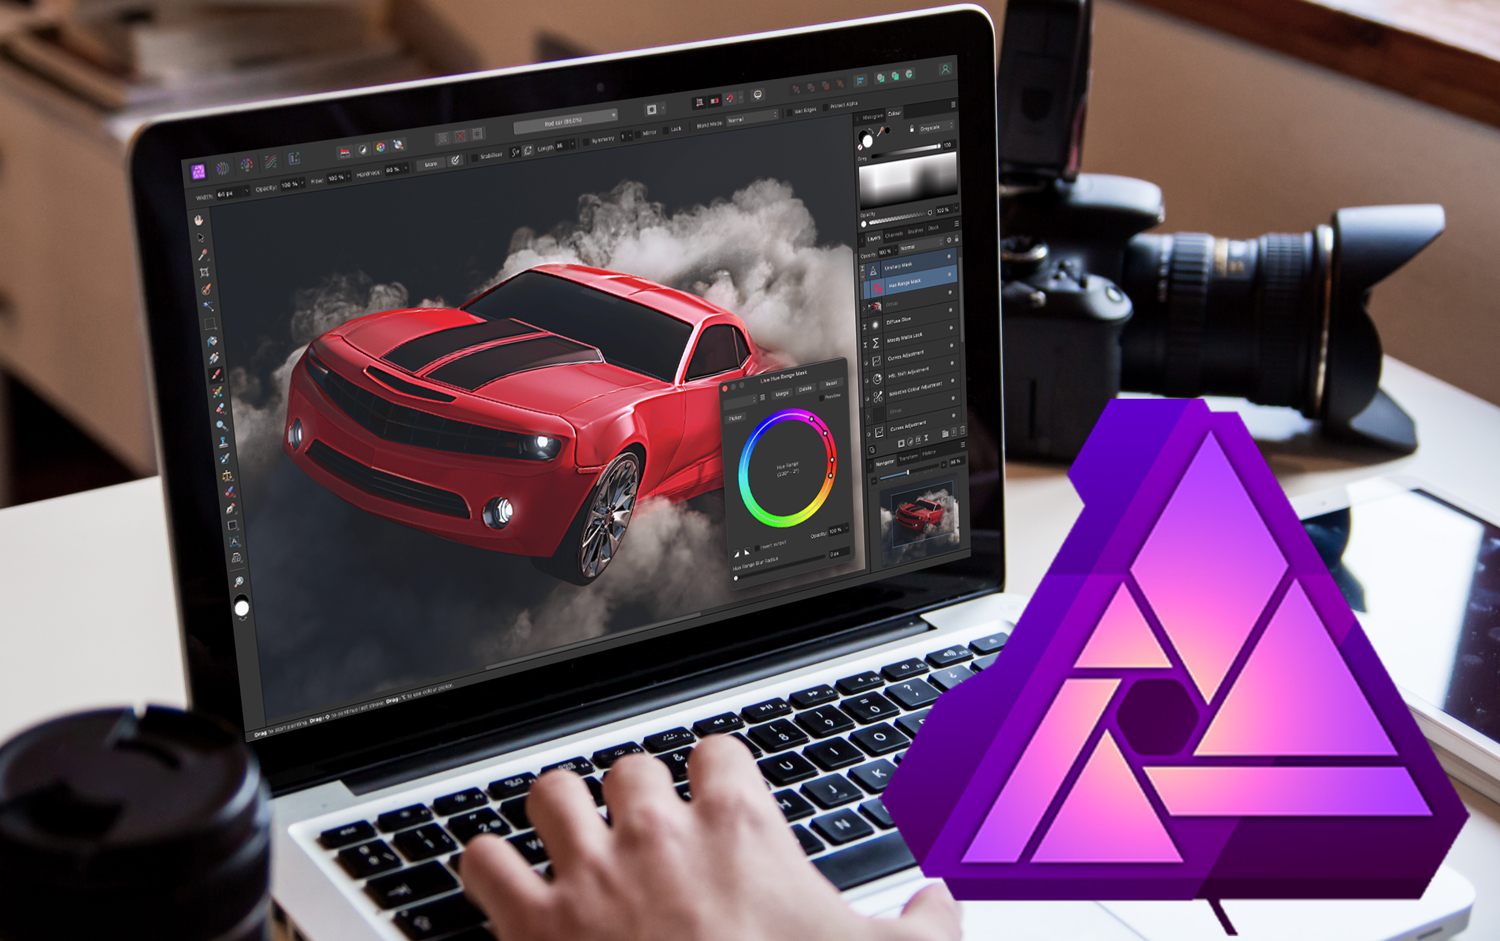 Laptop with Affinity Photo open editing a picture of a car